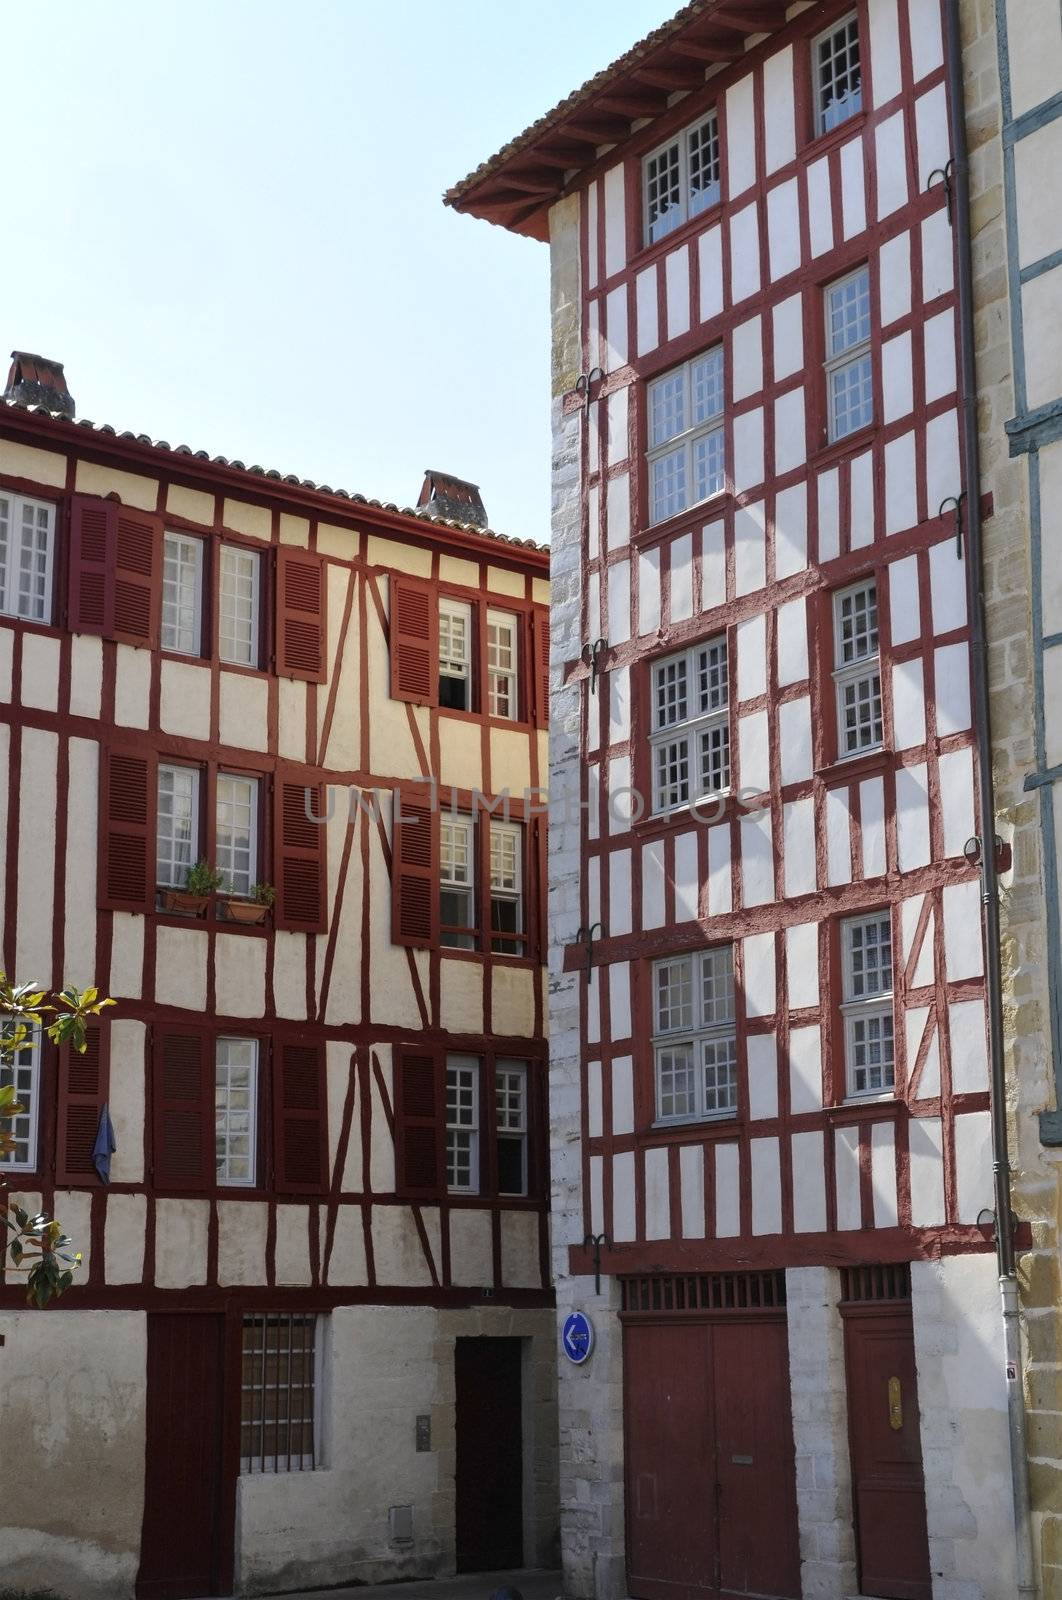 Typical Basque houses in the city of Bayonne with a blue sky